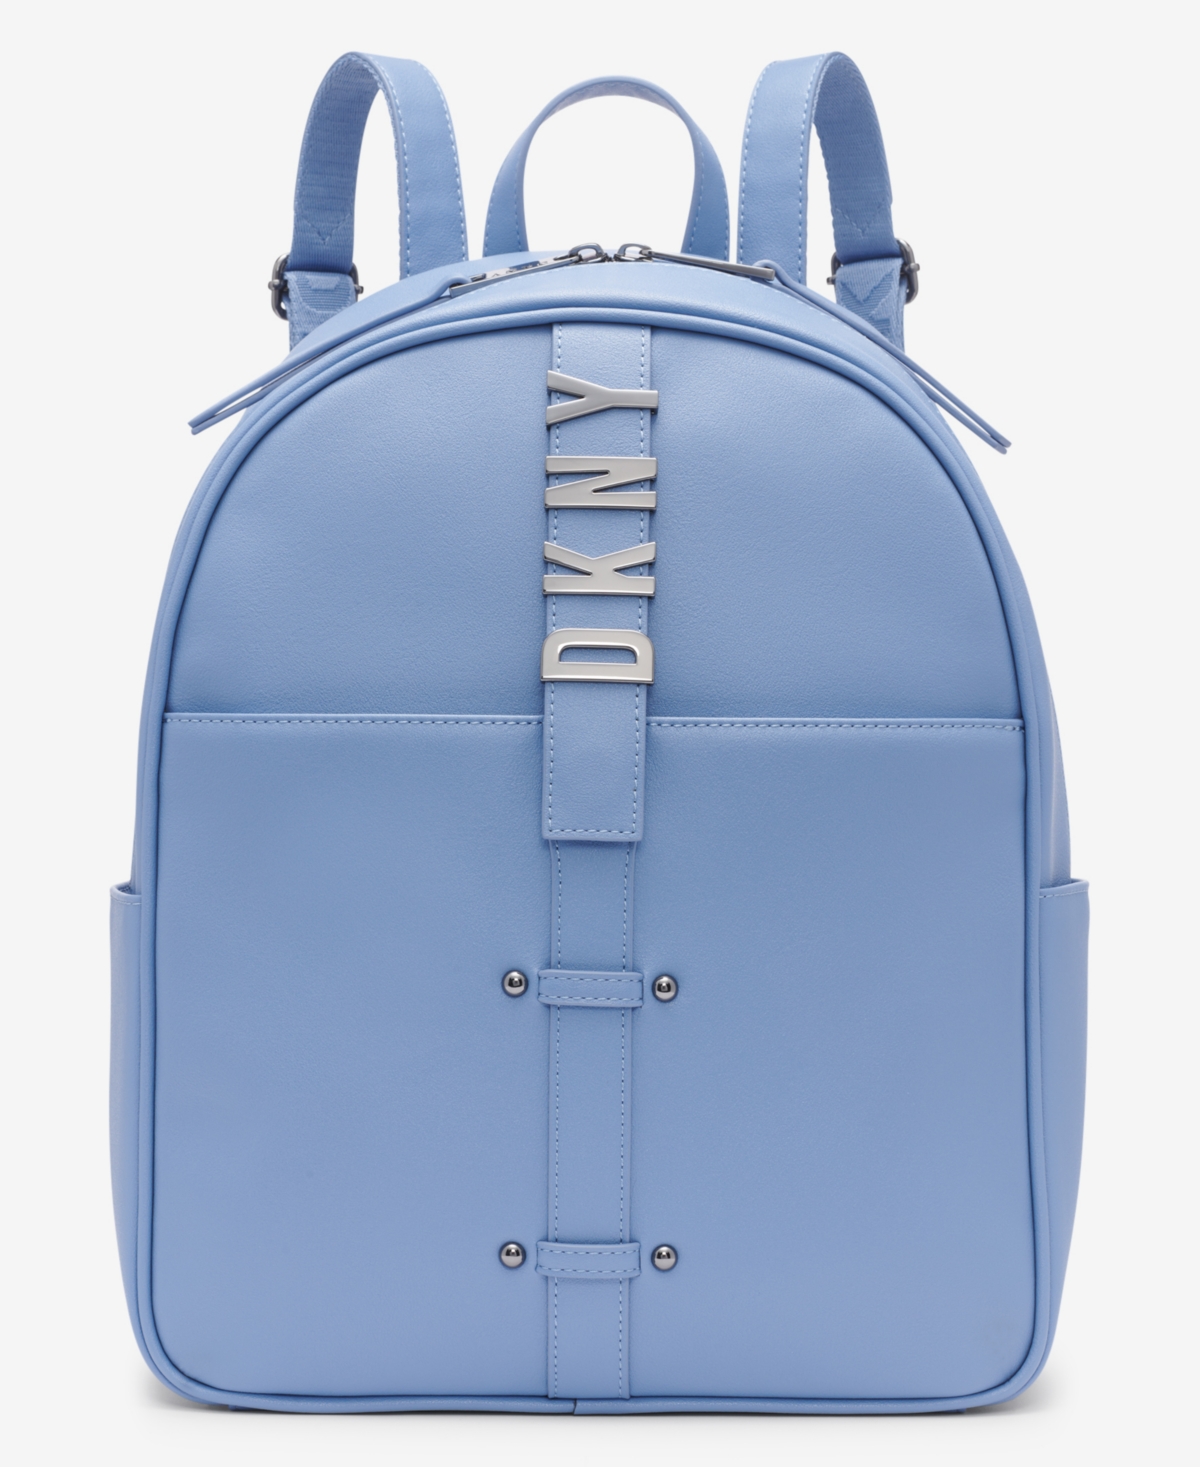 Dkny Nyc Backpack In Blue Suede